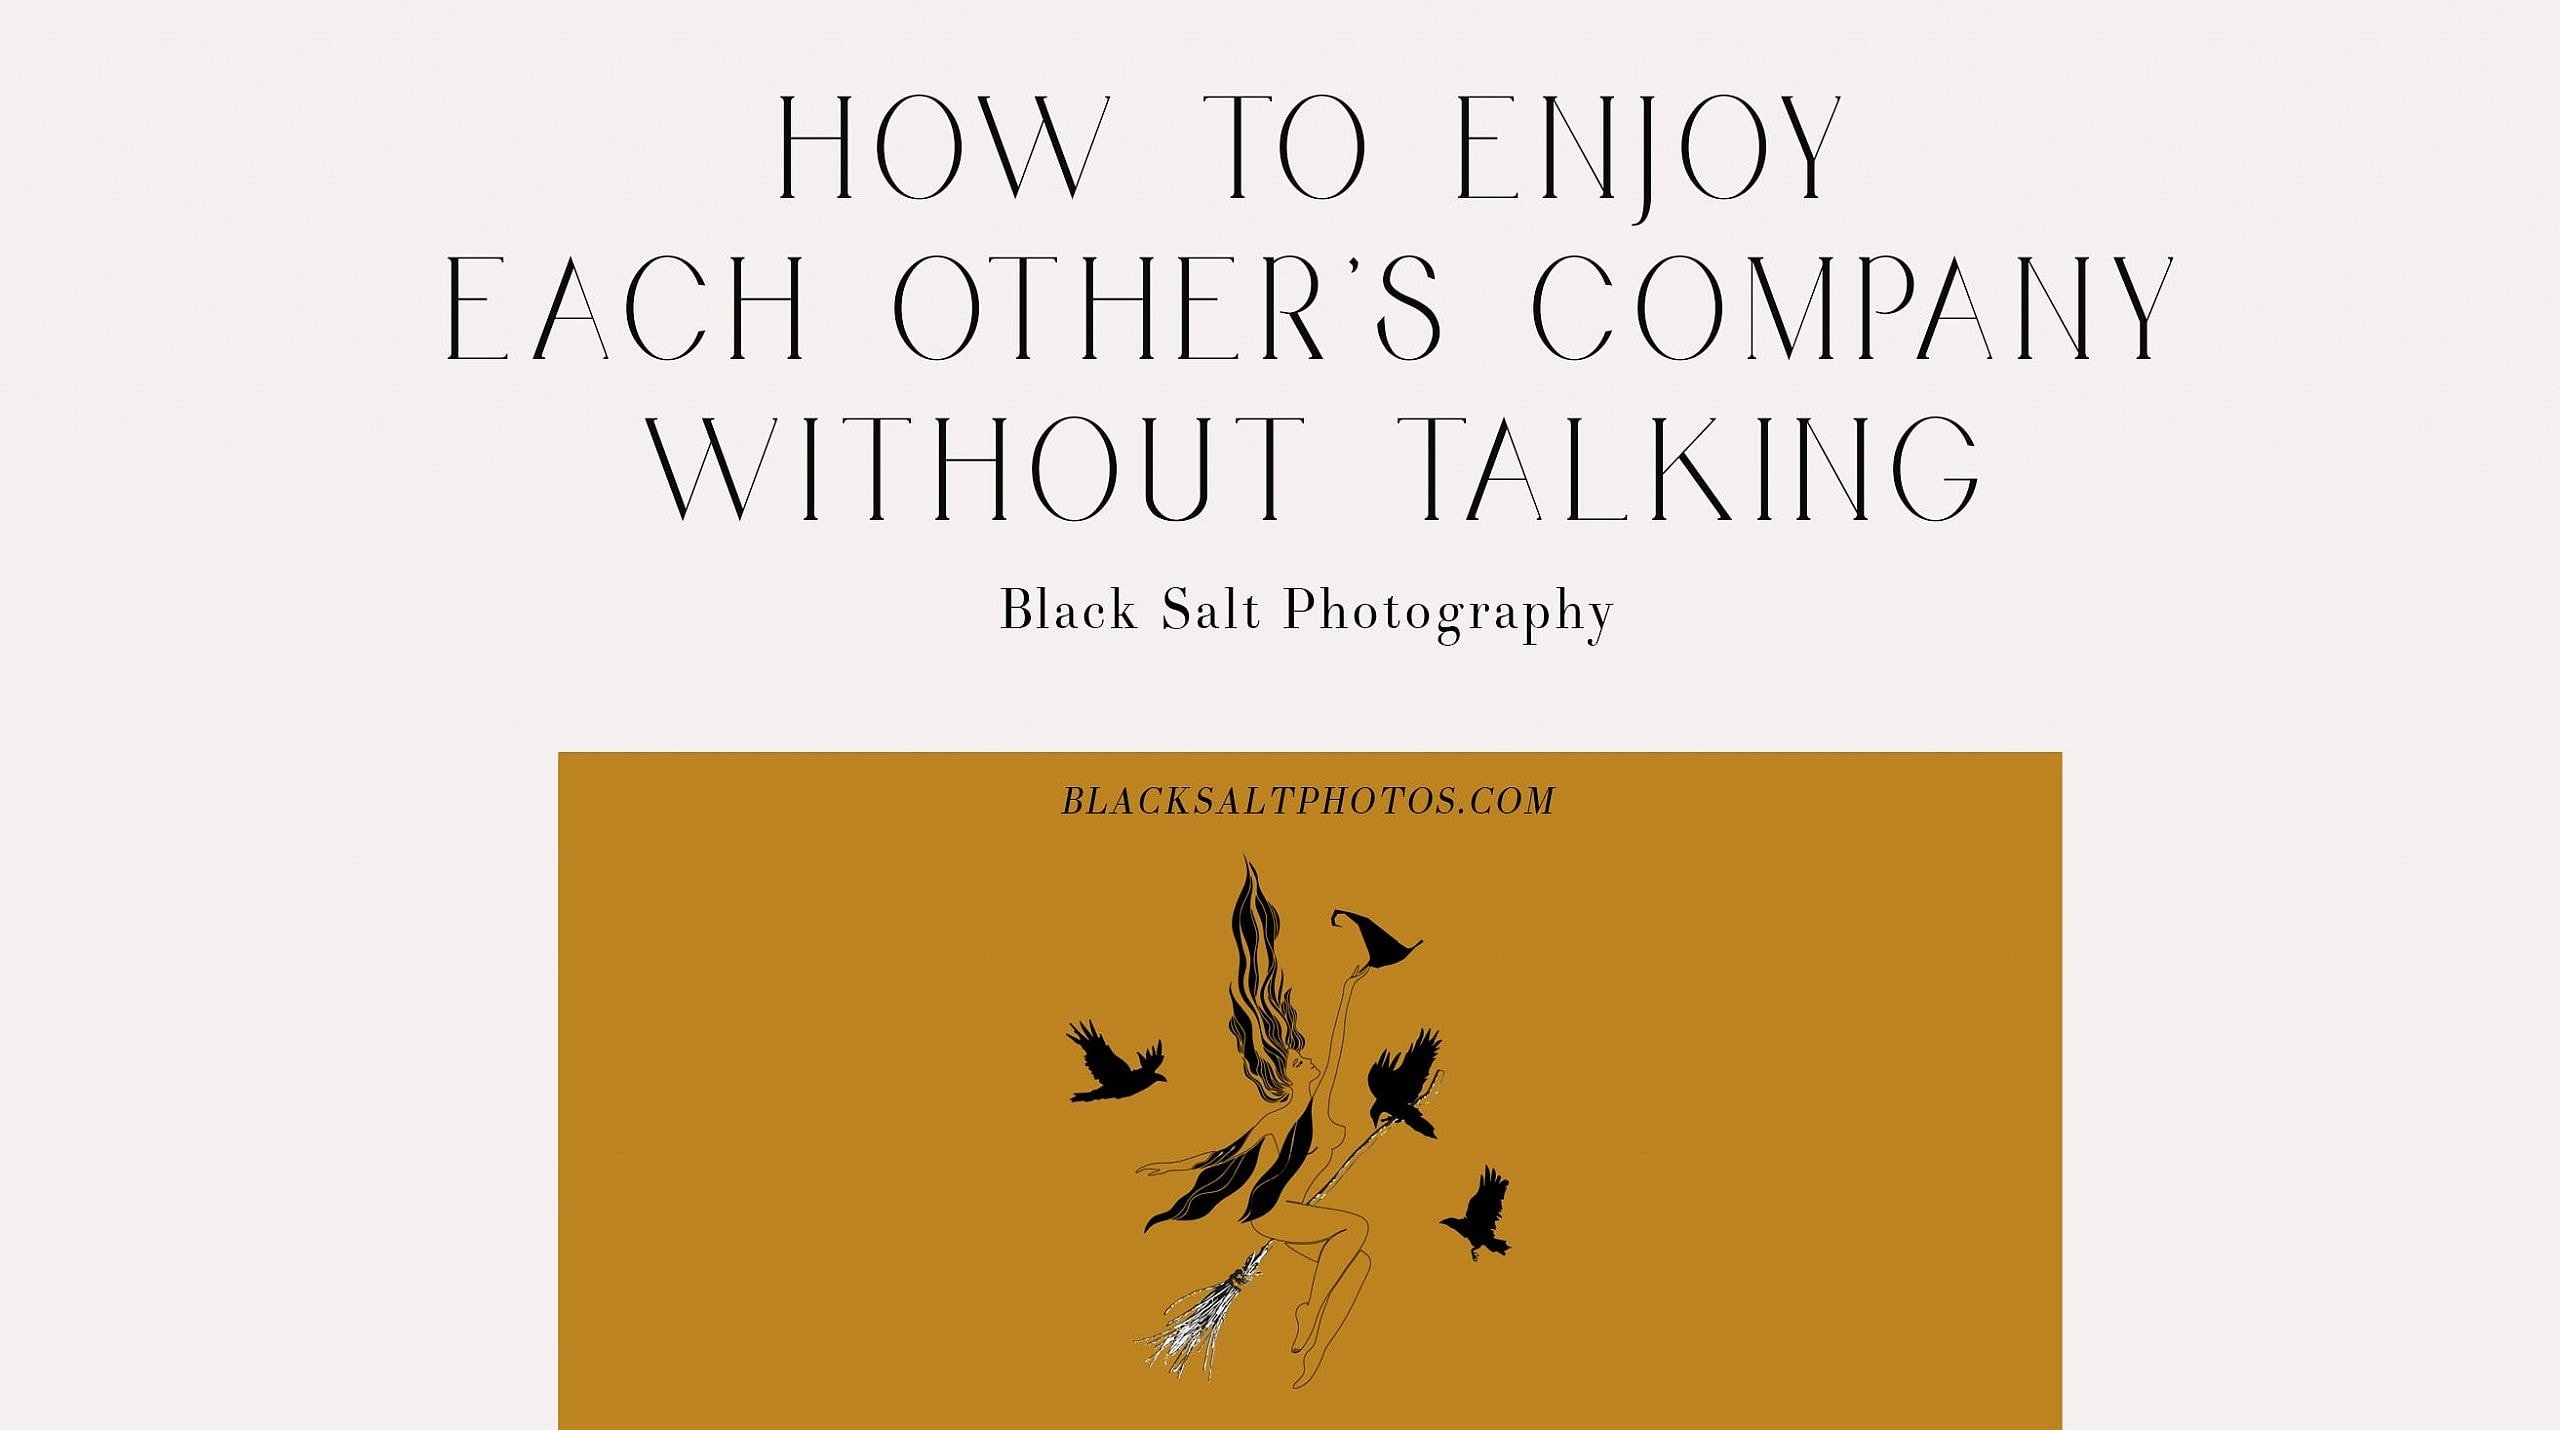 Tips on how to enjoy each other's company without talking